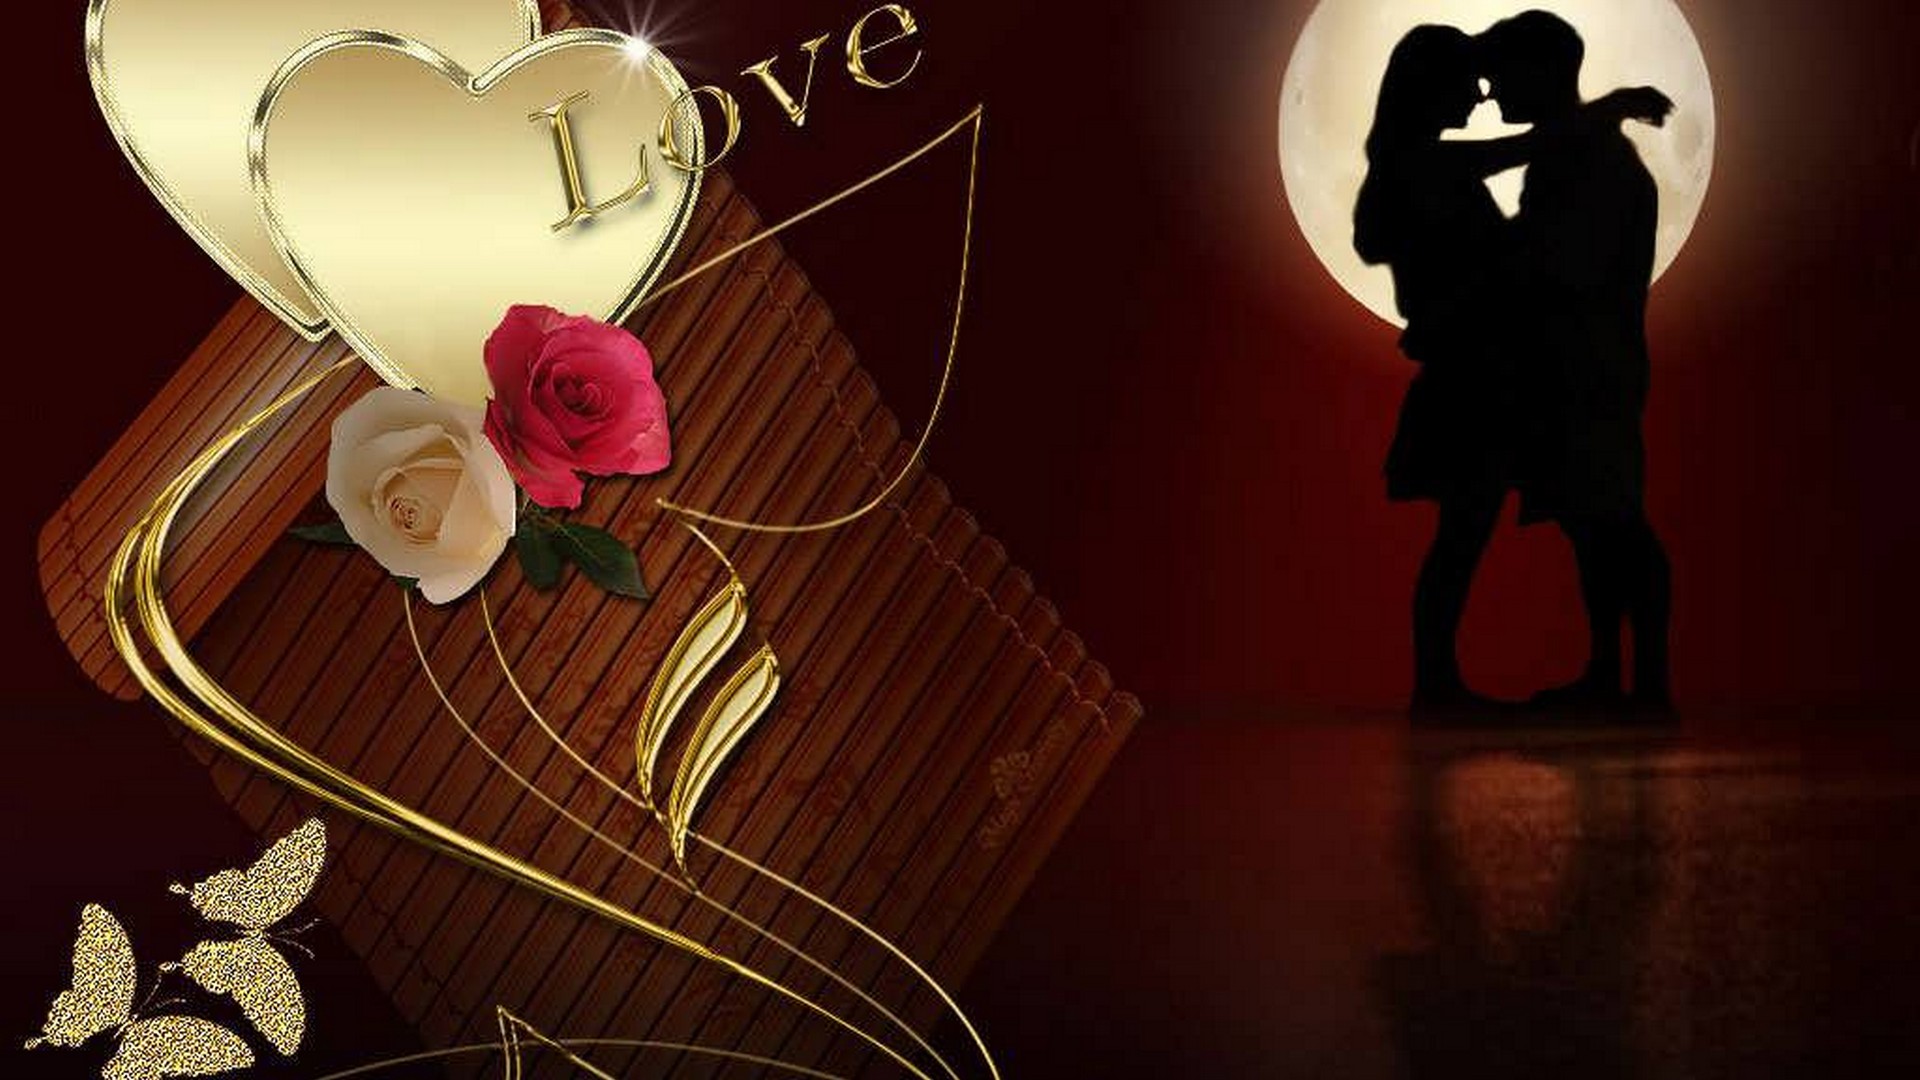 Romantic Valentine Day Wallpaper Hd - Love Valentine Images Of Couples -  1920x1080 Wallpaper 